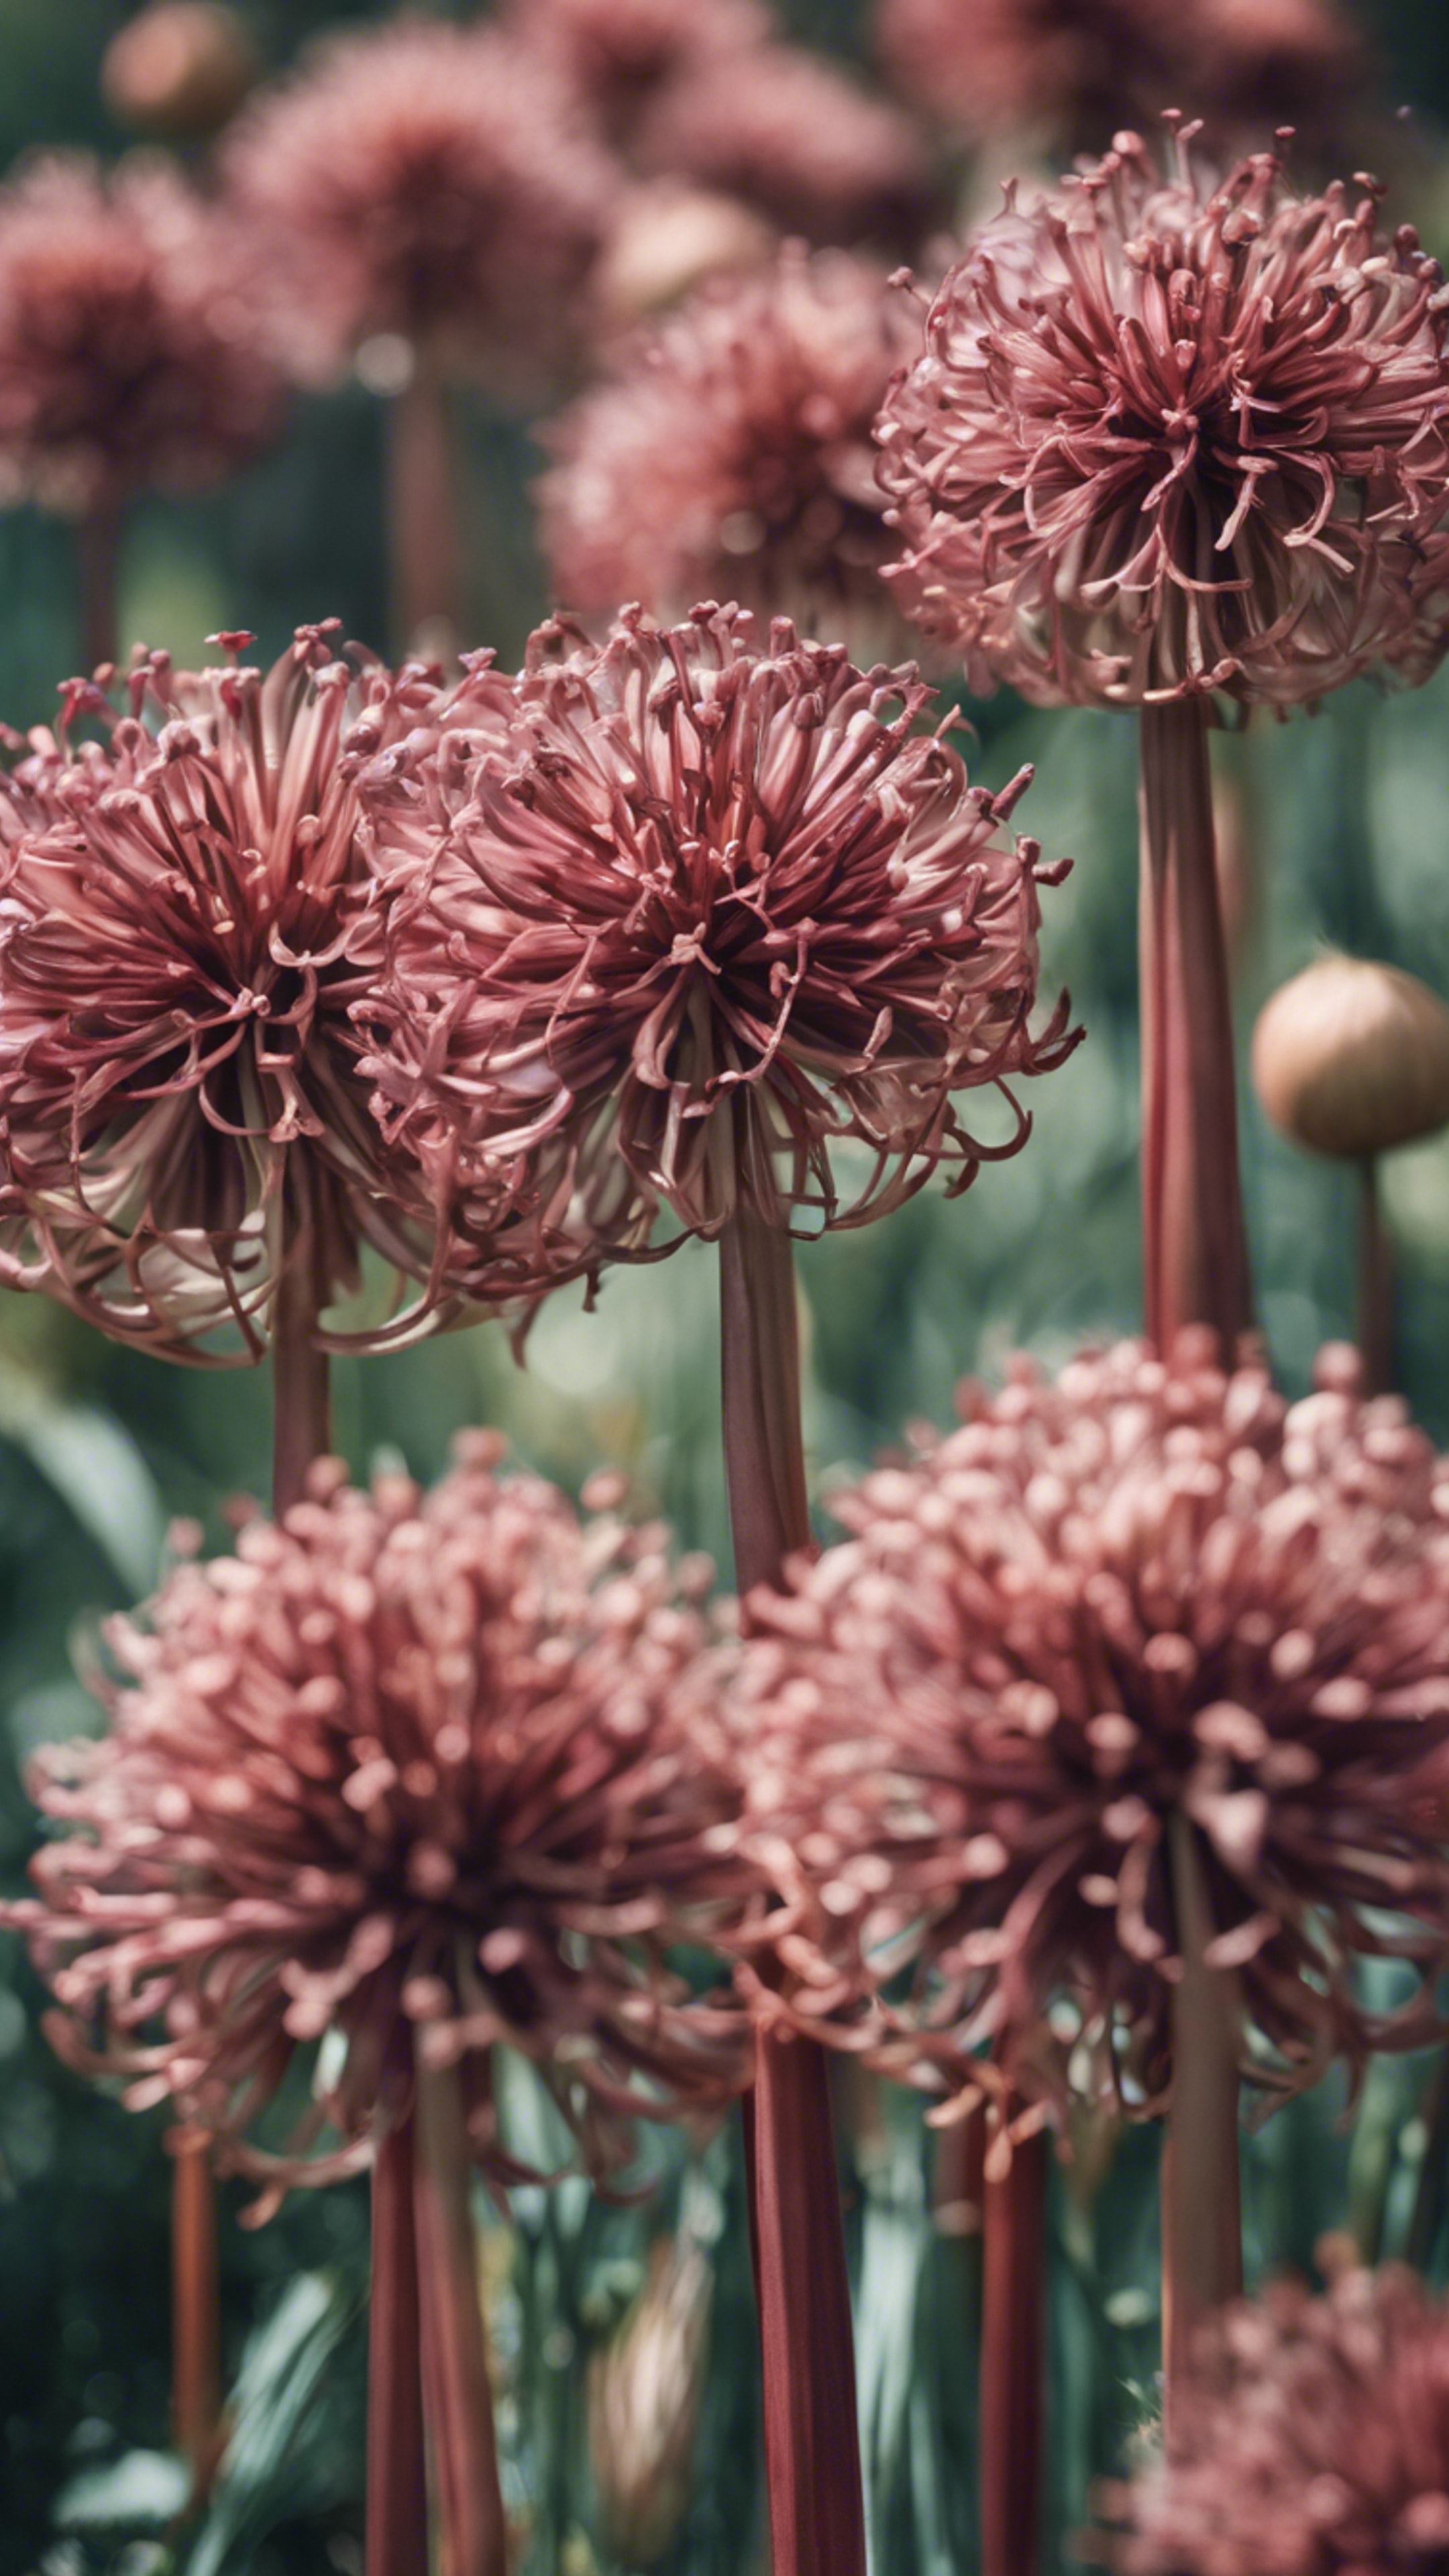 Immerse in nature with a valiant, organic motif of red-washed and brown alliums, harmoniously repeating. duvar kağıdı[b1ade6bf63d74276ba8b]